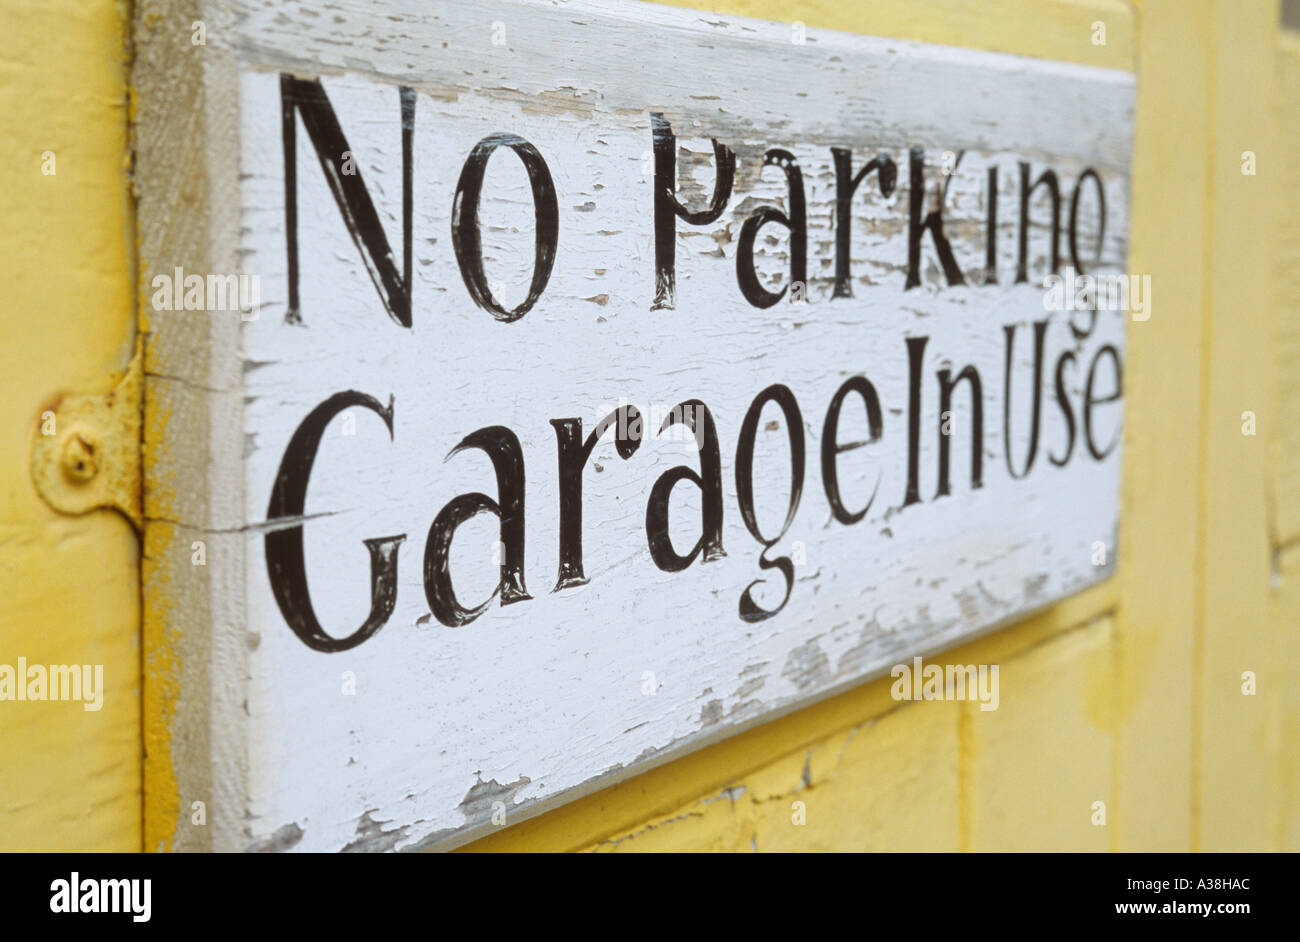 Stylish handpainted notice on yellow door or wall proclaiming No parking Garage in use Stock Photo